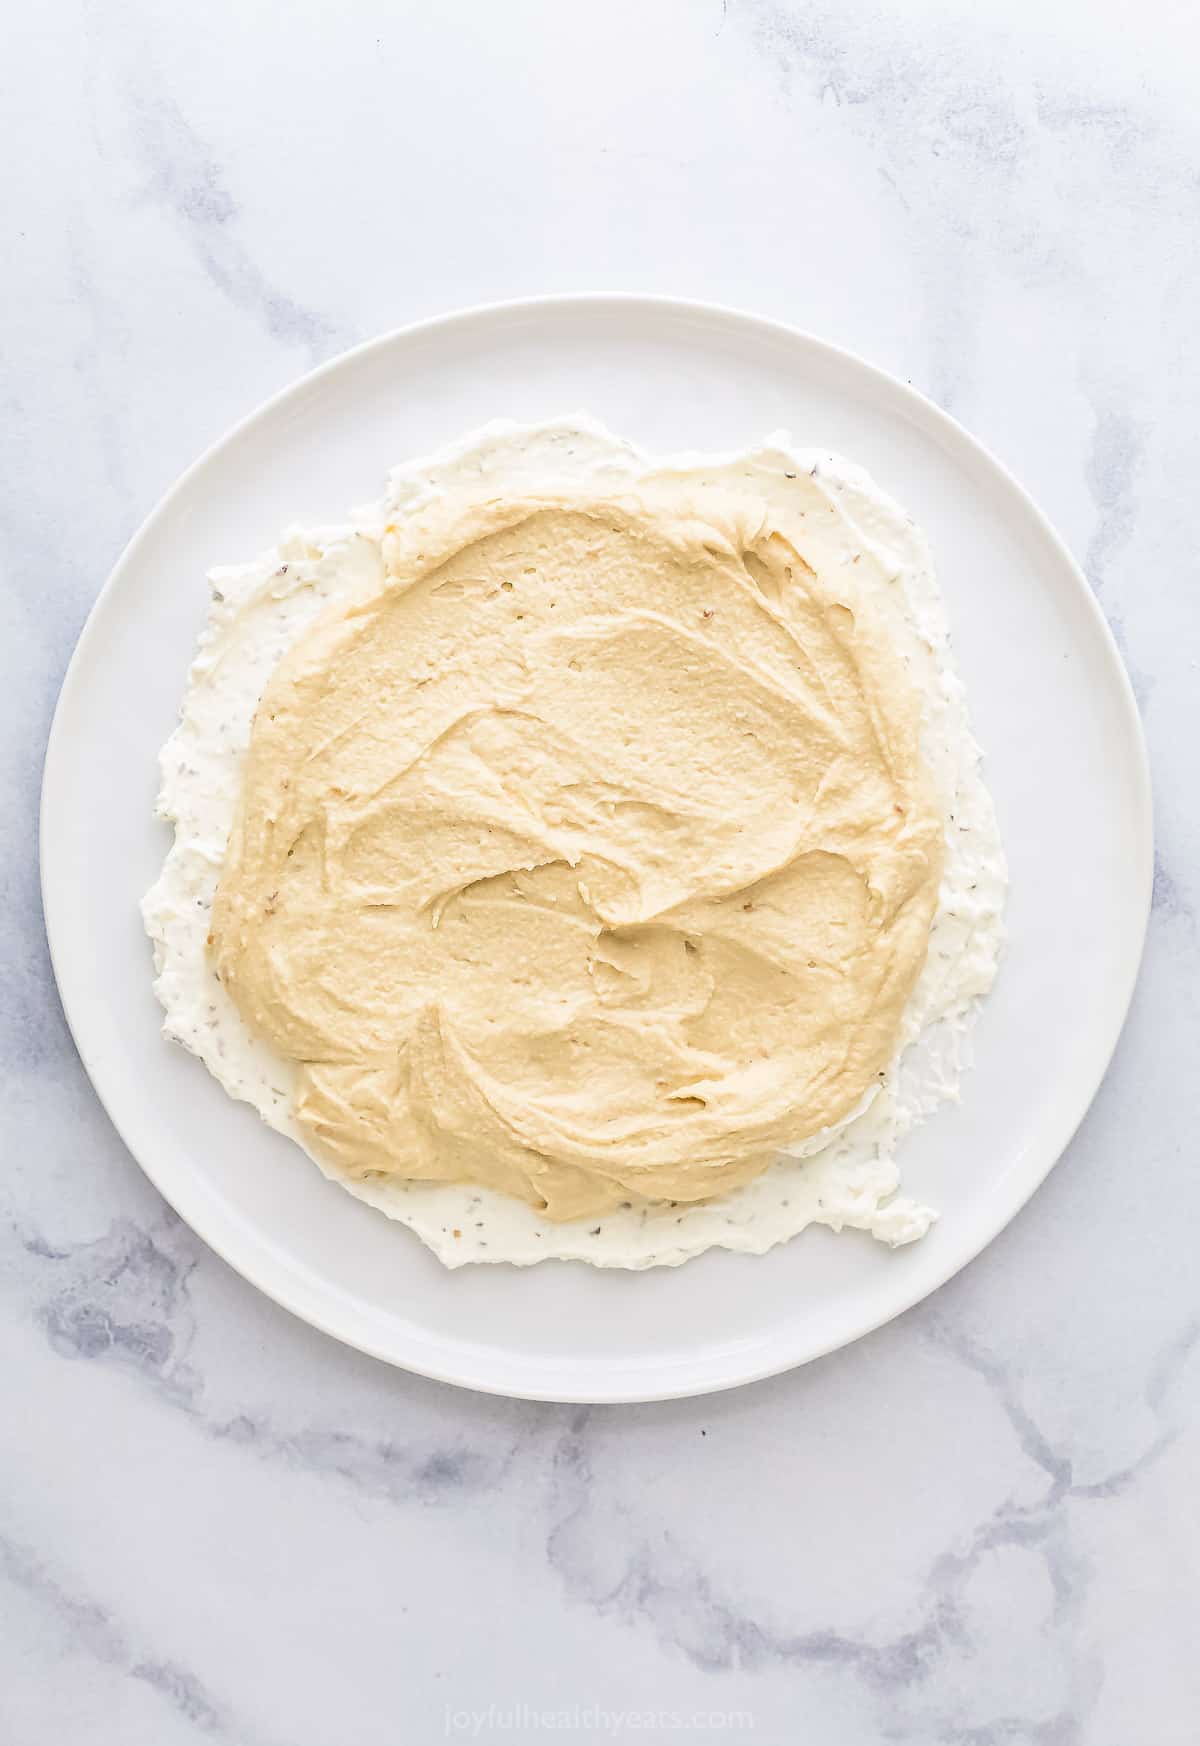 A large plate containing a layer of whipped feta topped with a layer of original hummus